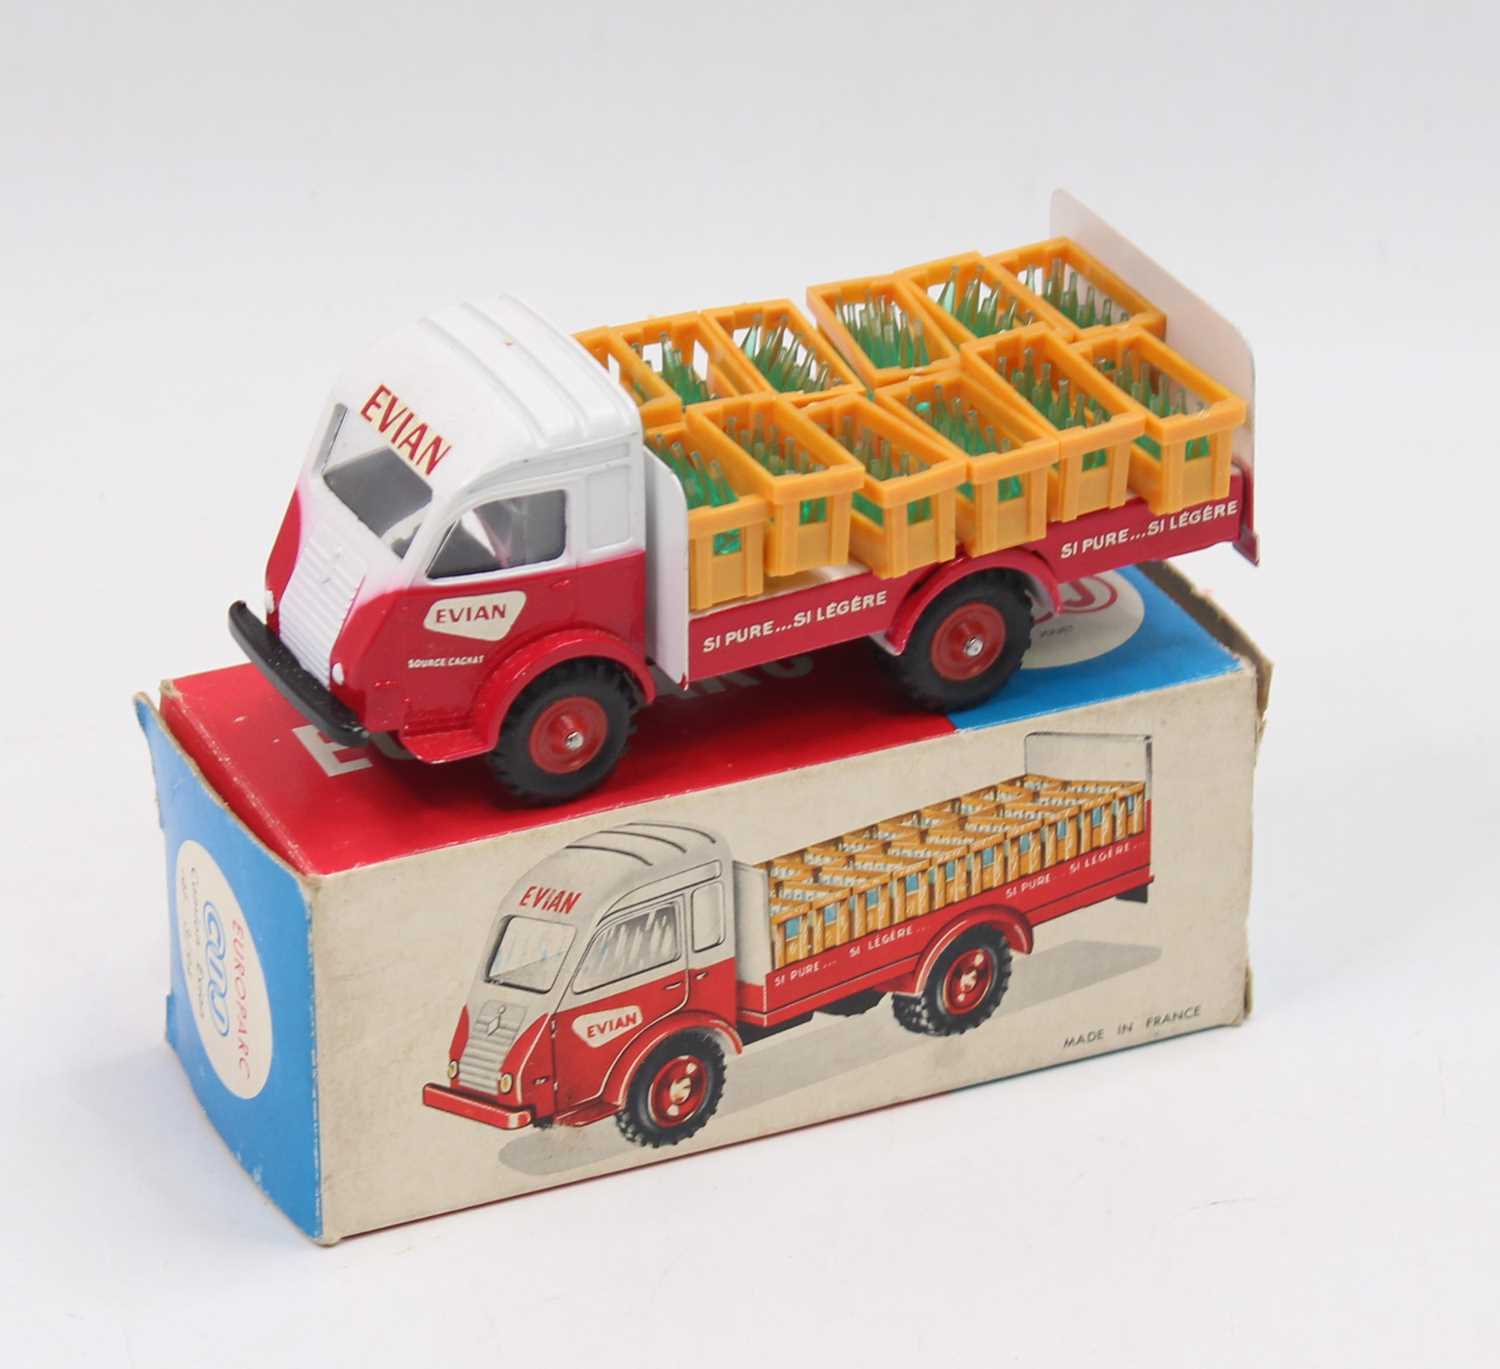 CIJ 3/94 Renault Open Back Delivery Truck "Evian" - pale grey, red including plastic hubs with black